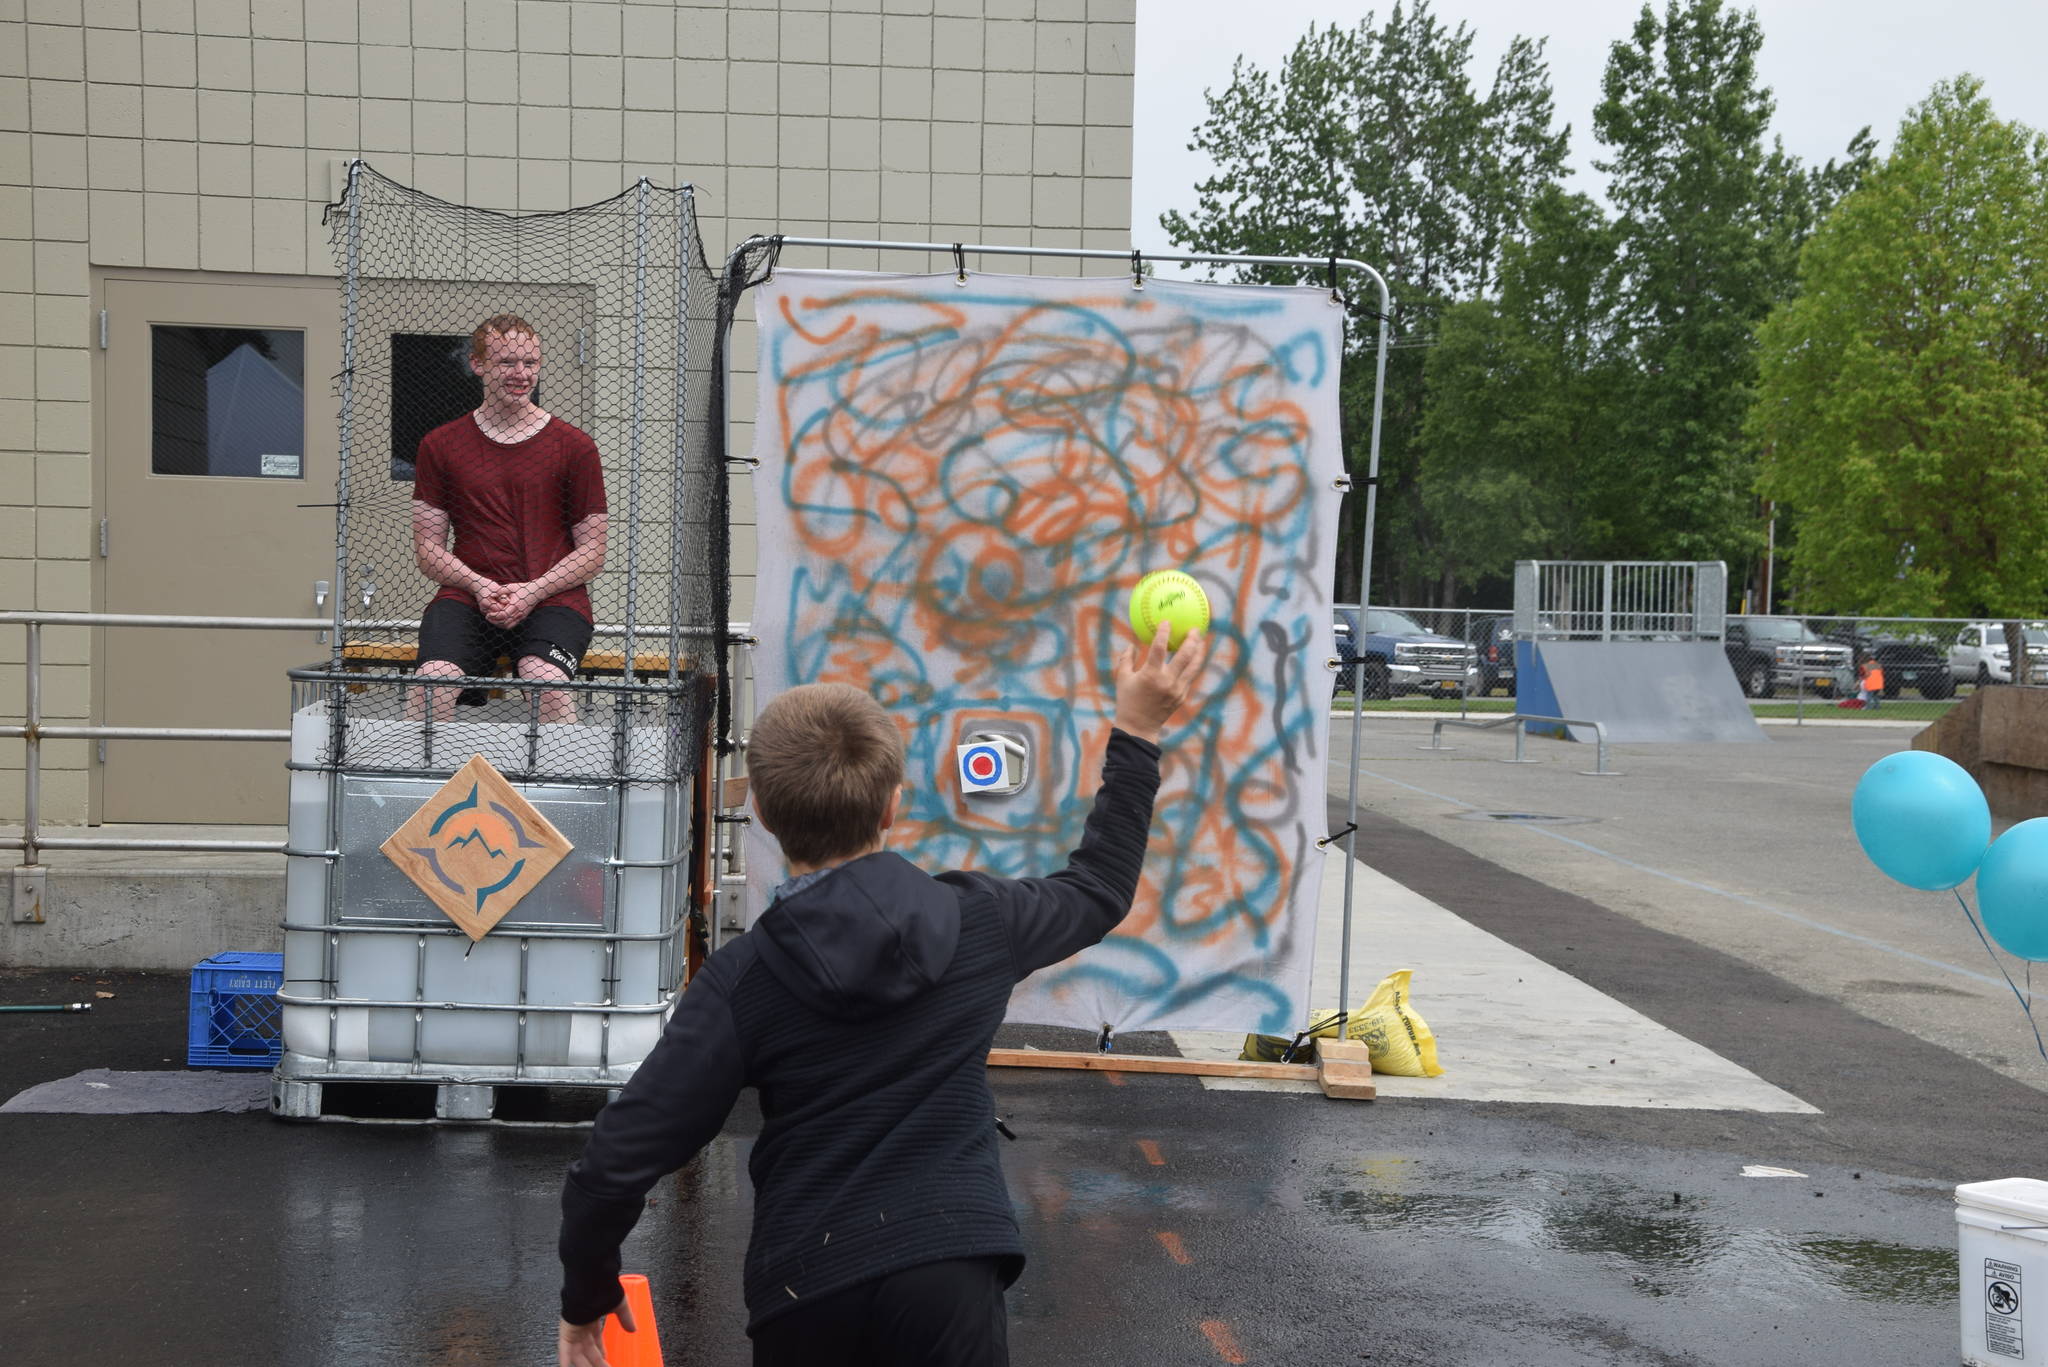 A boy tries his hand at the Compass Dunk Tank during the Family Fun in the Midnight Sun festival at the North Peninsula Recreation Center in Nikiski, Alaska on June 15, 2019. (Photo by Brian Mazurek/Peninsula Clarion)